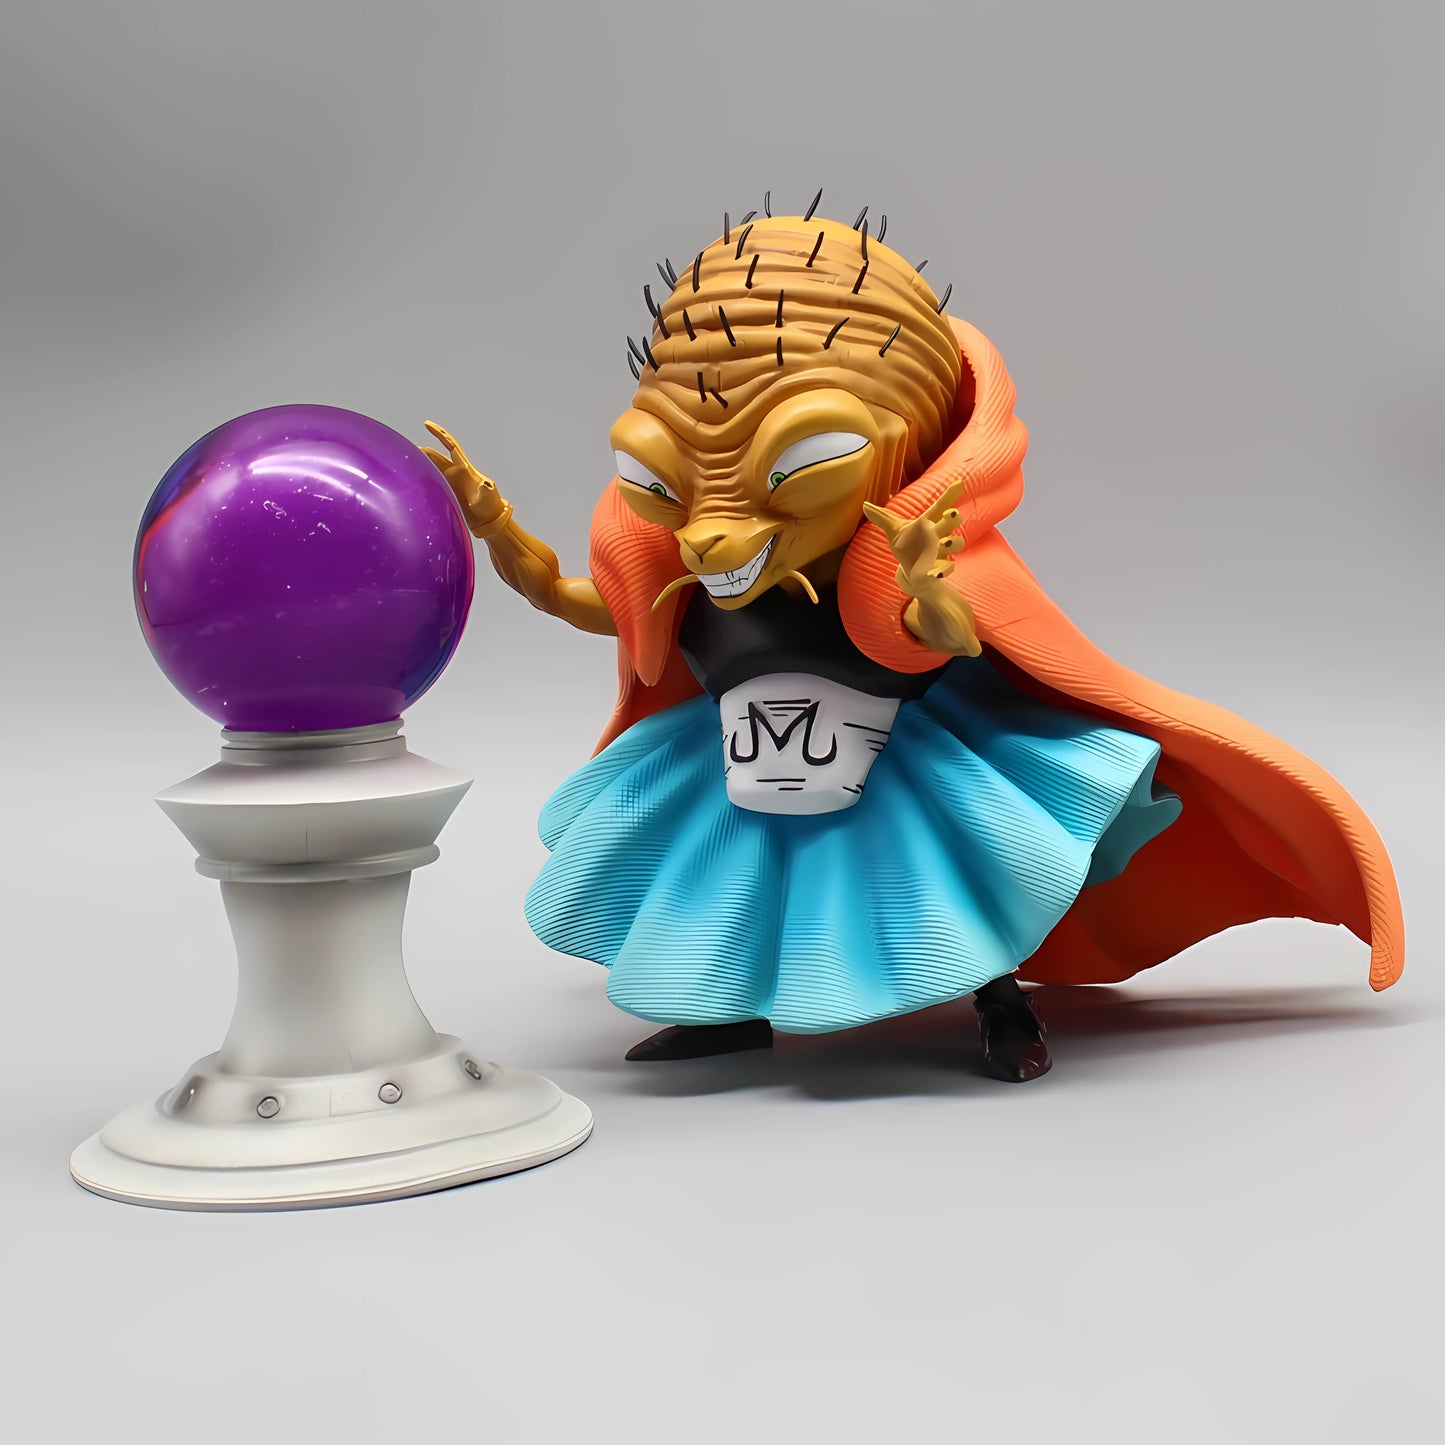 Dragon Ball collectible figure of Babidi with his hand stretched towards a purple crystal ball on a classic column pedestal, capturing a moment of sorcery in Dragon Ball memorabilia.